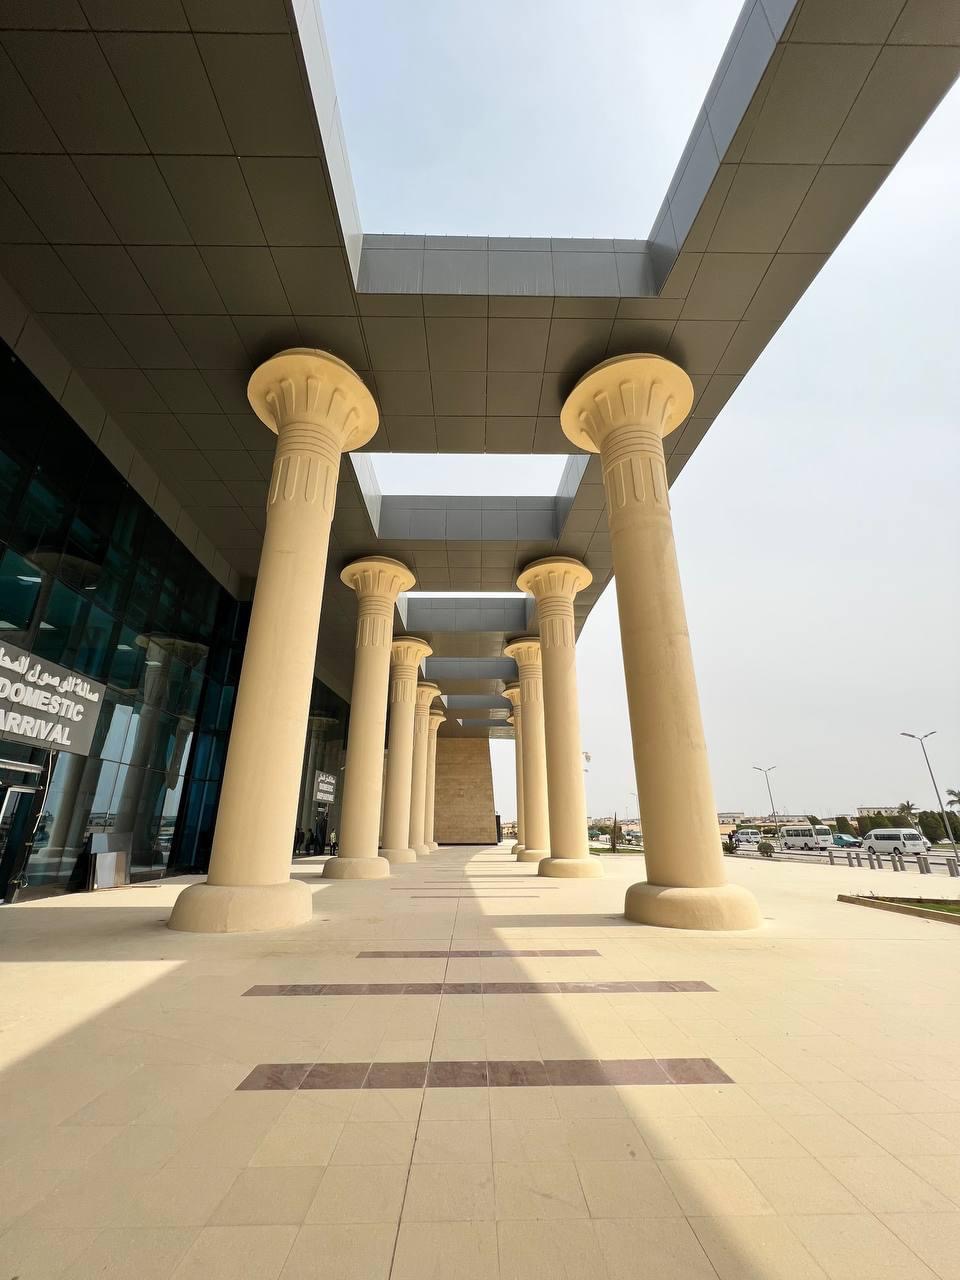 Egyptian columns at the Sphinx International Airport.